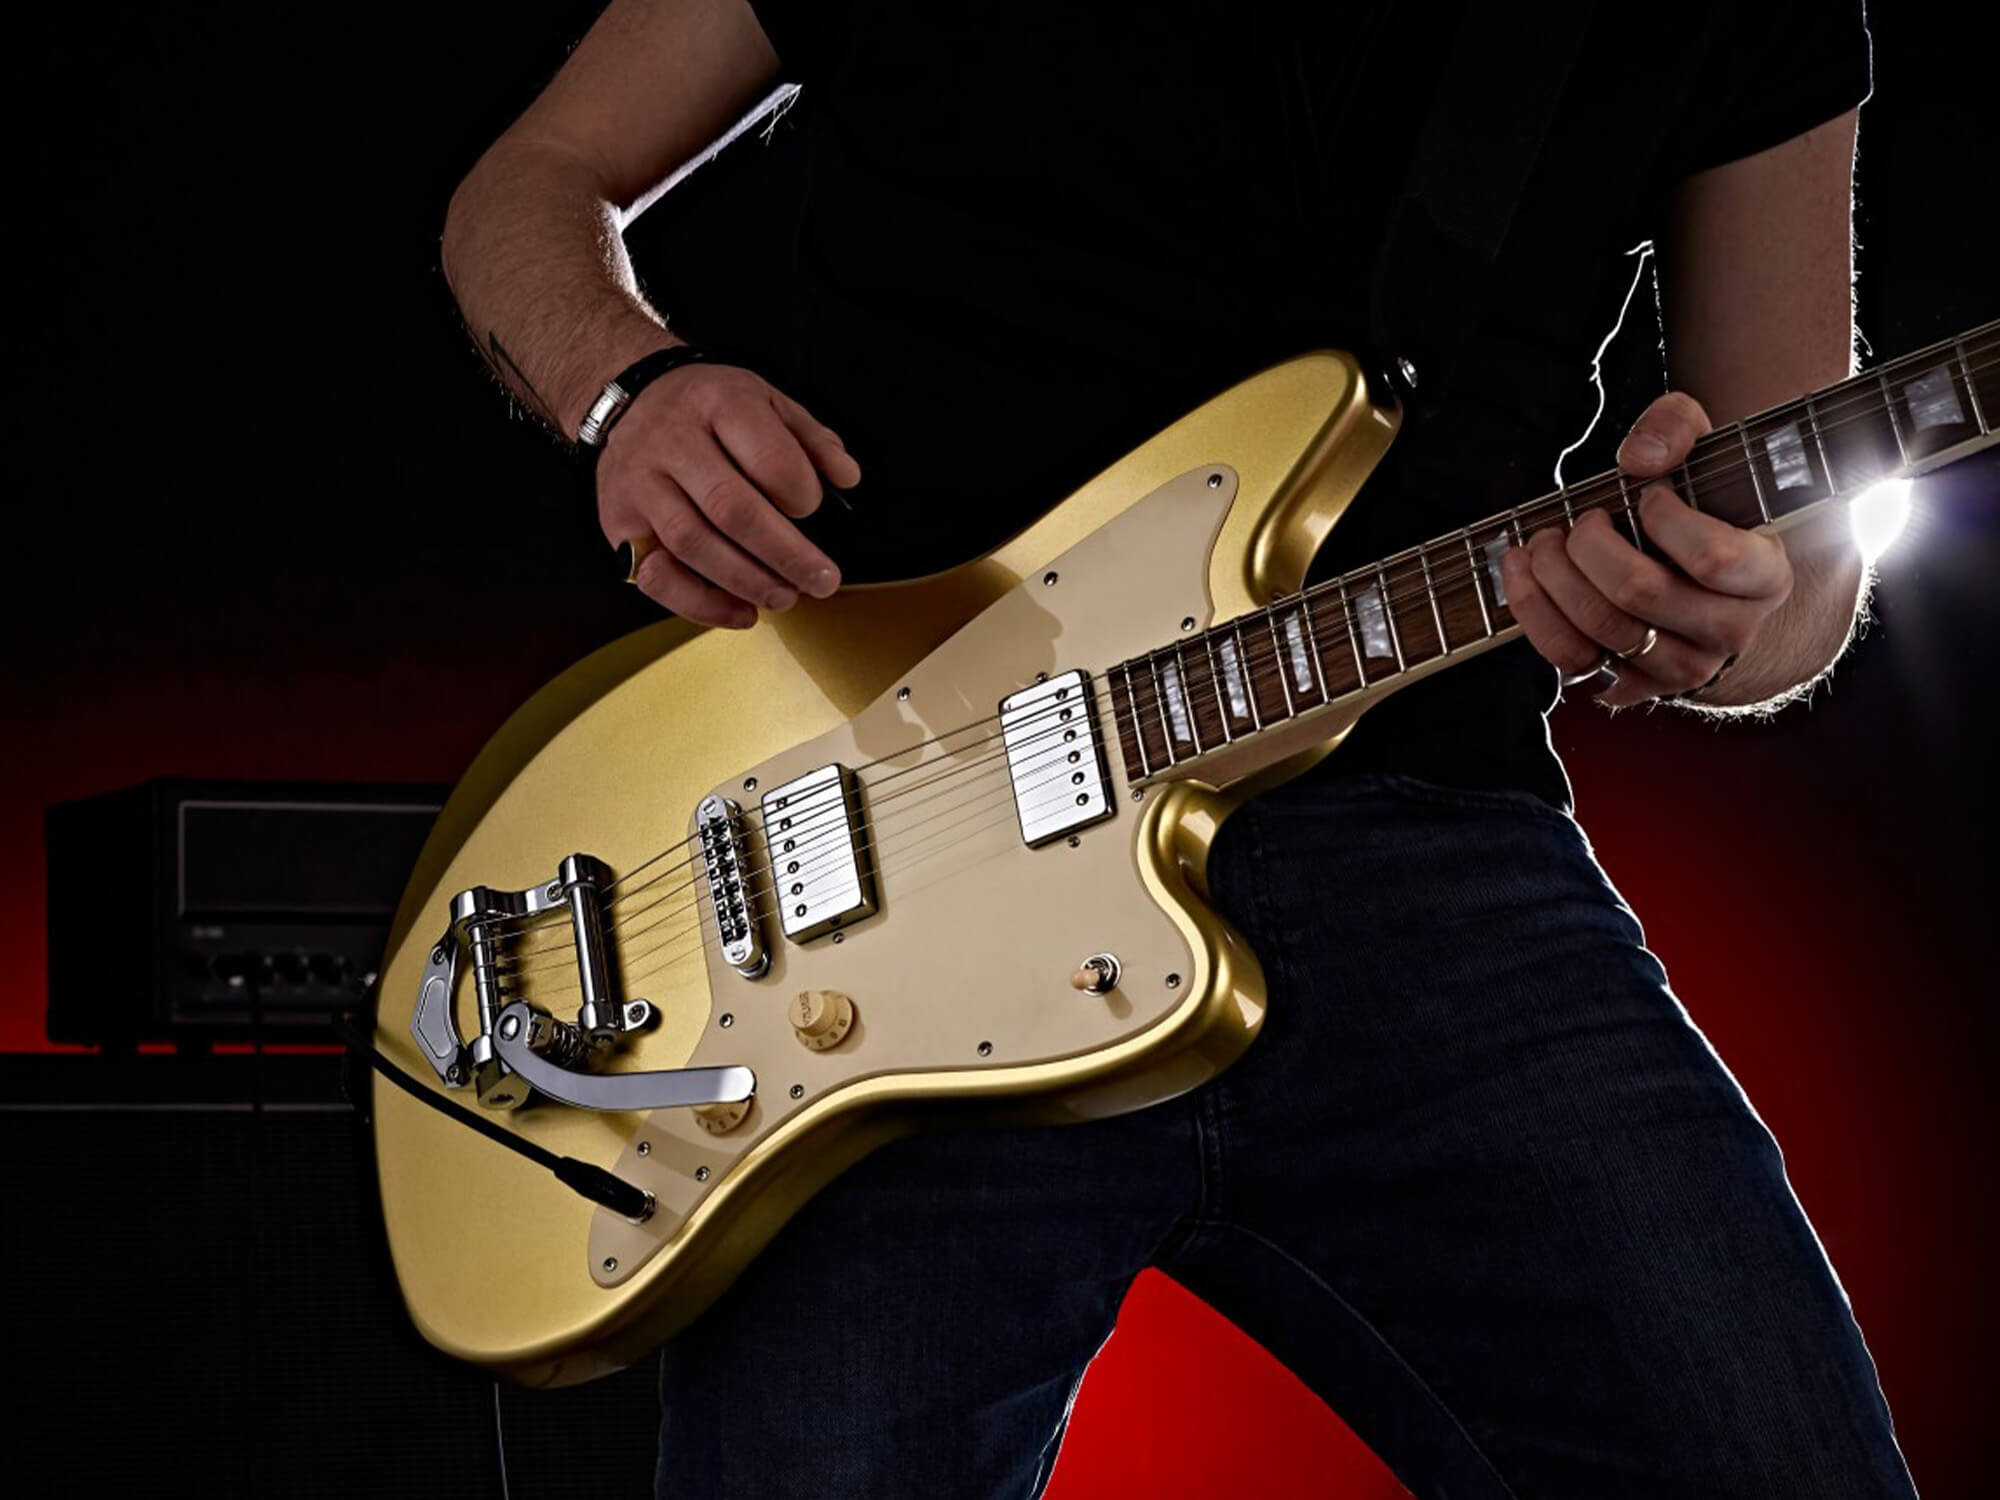 The G4M 638 TM model in Gold Sparkle